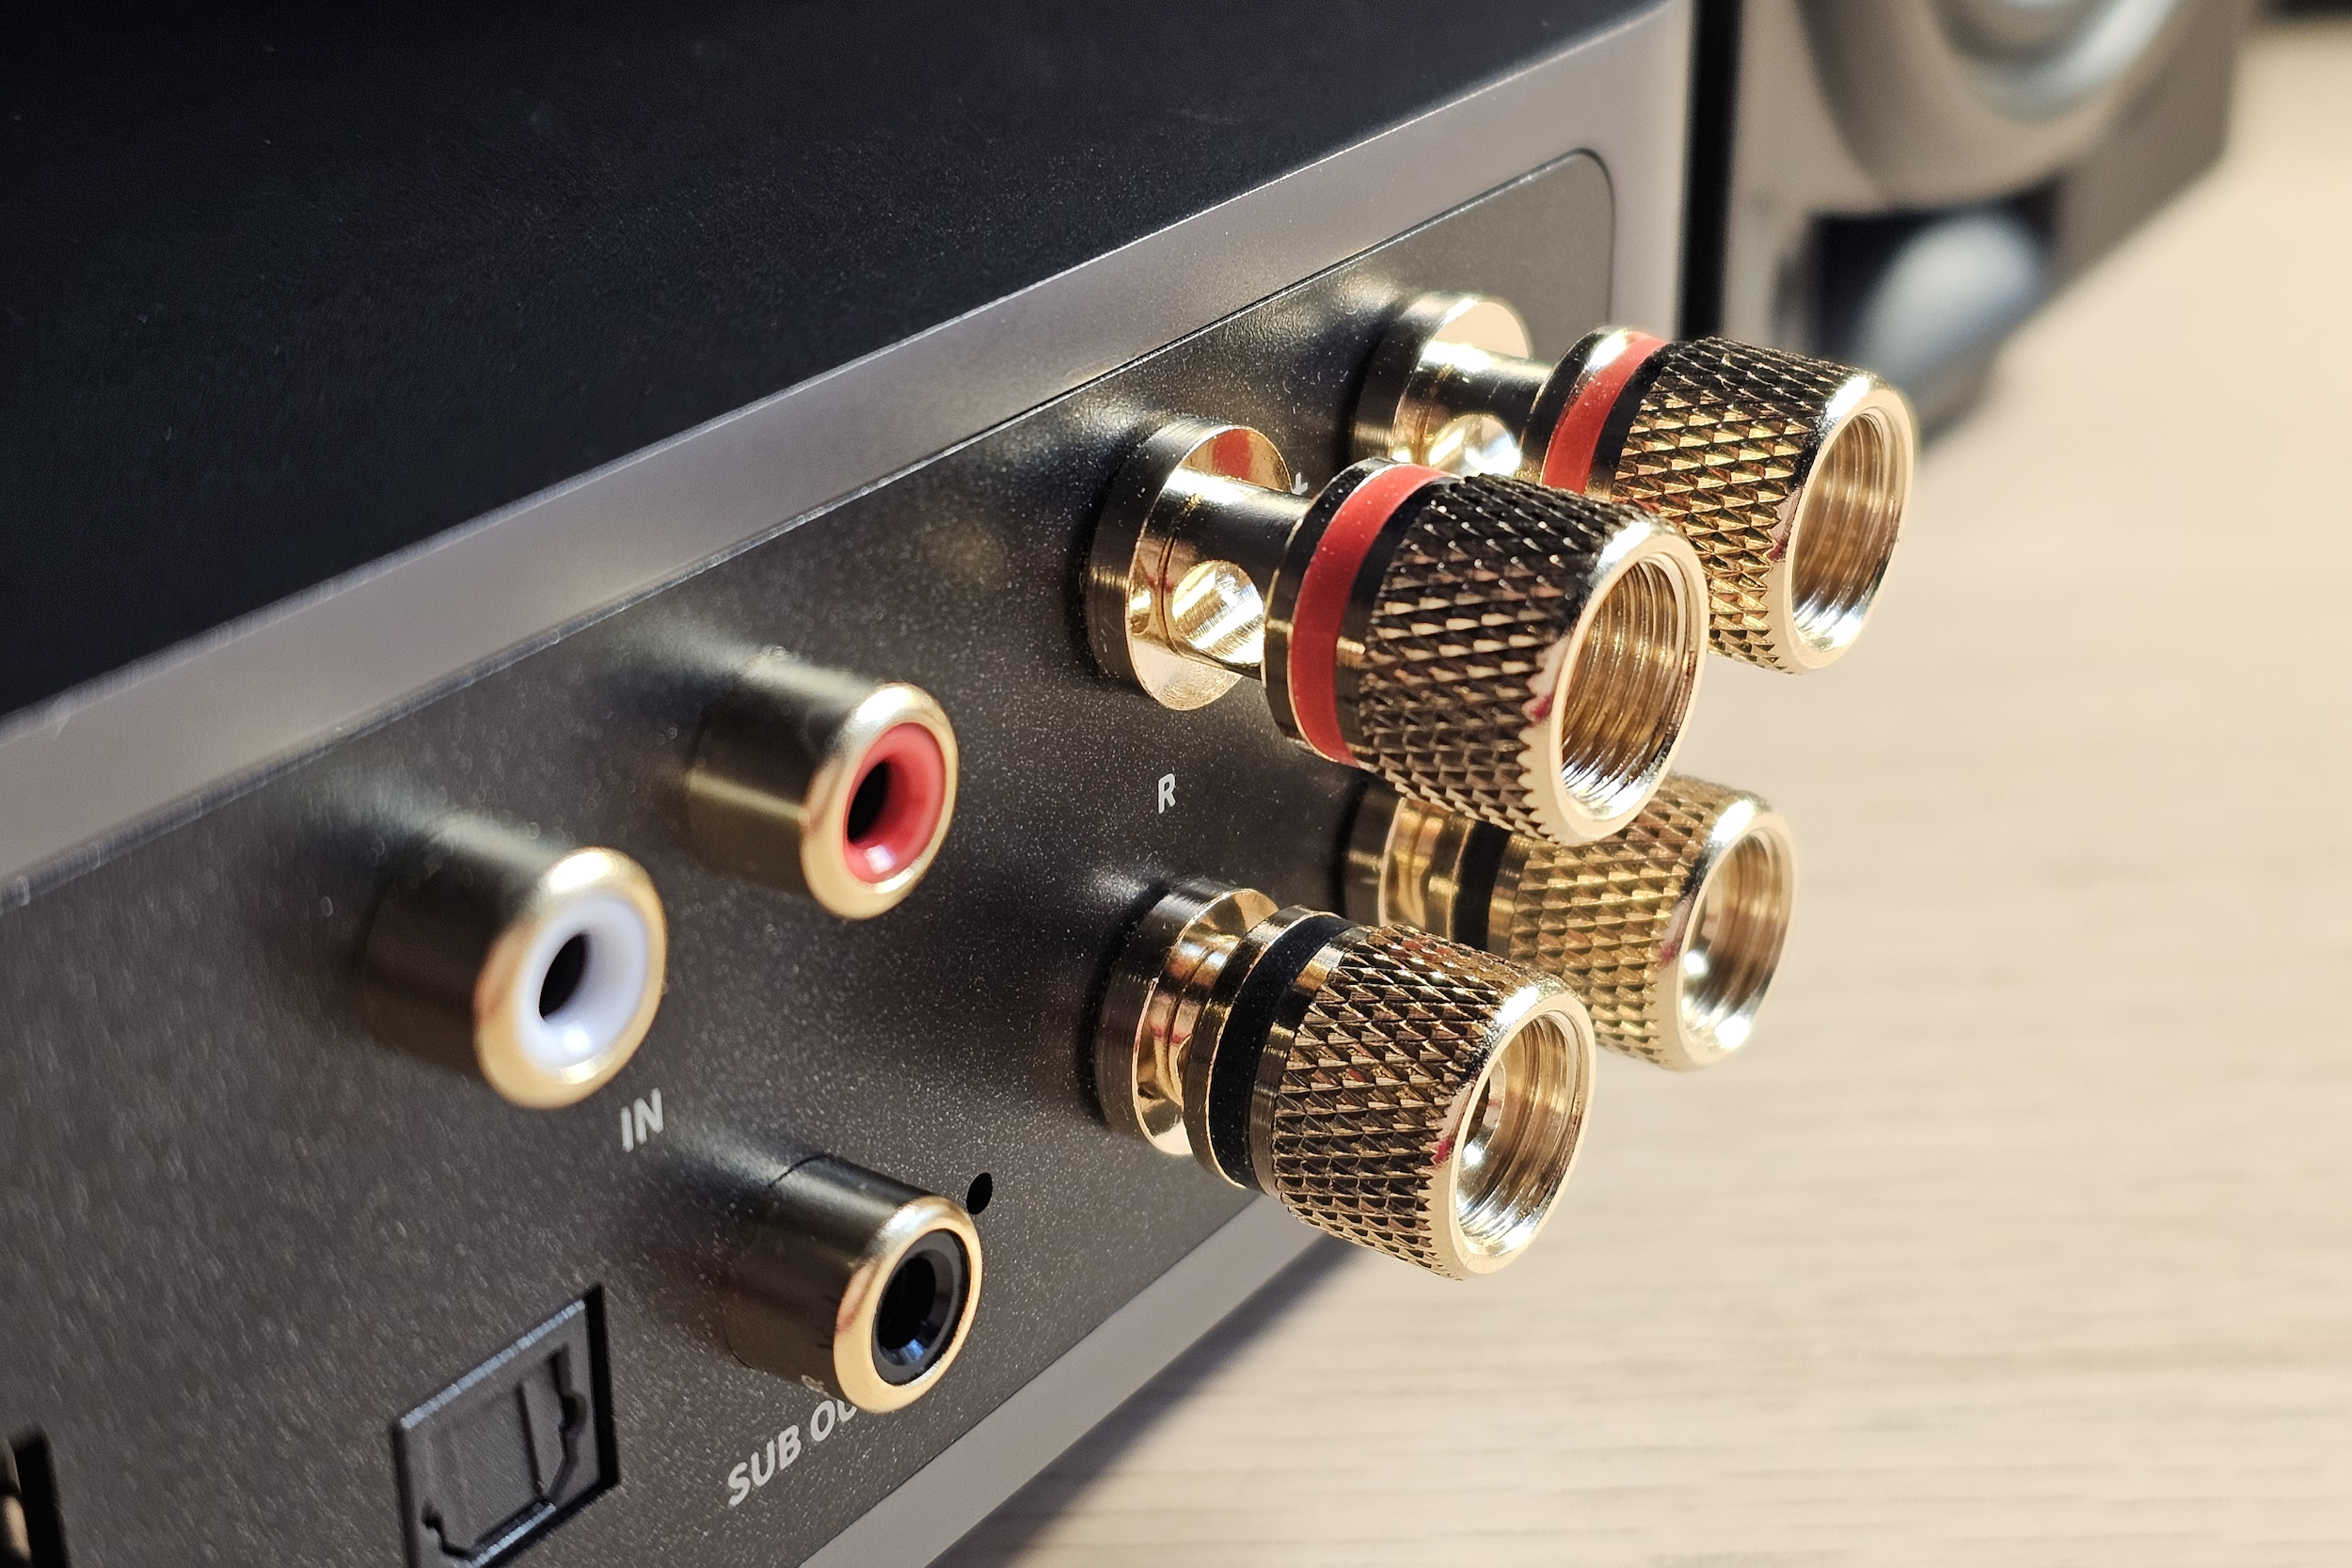 WiiM Amp Review - Why Pay DOUBLE For Less 